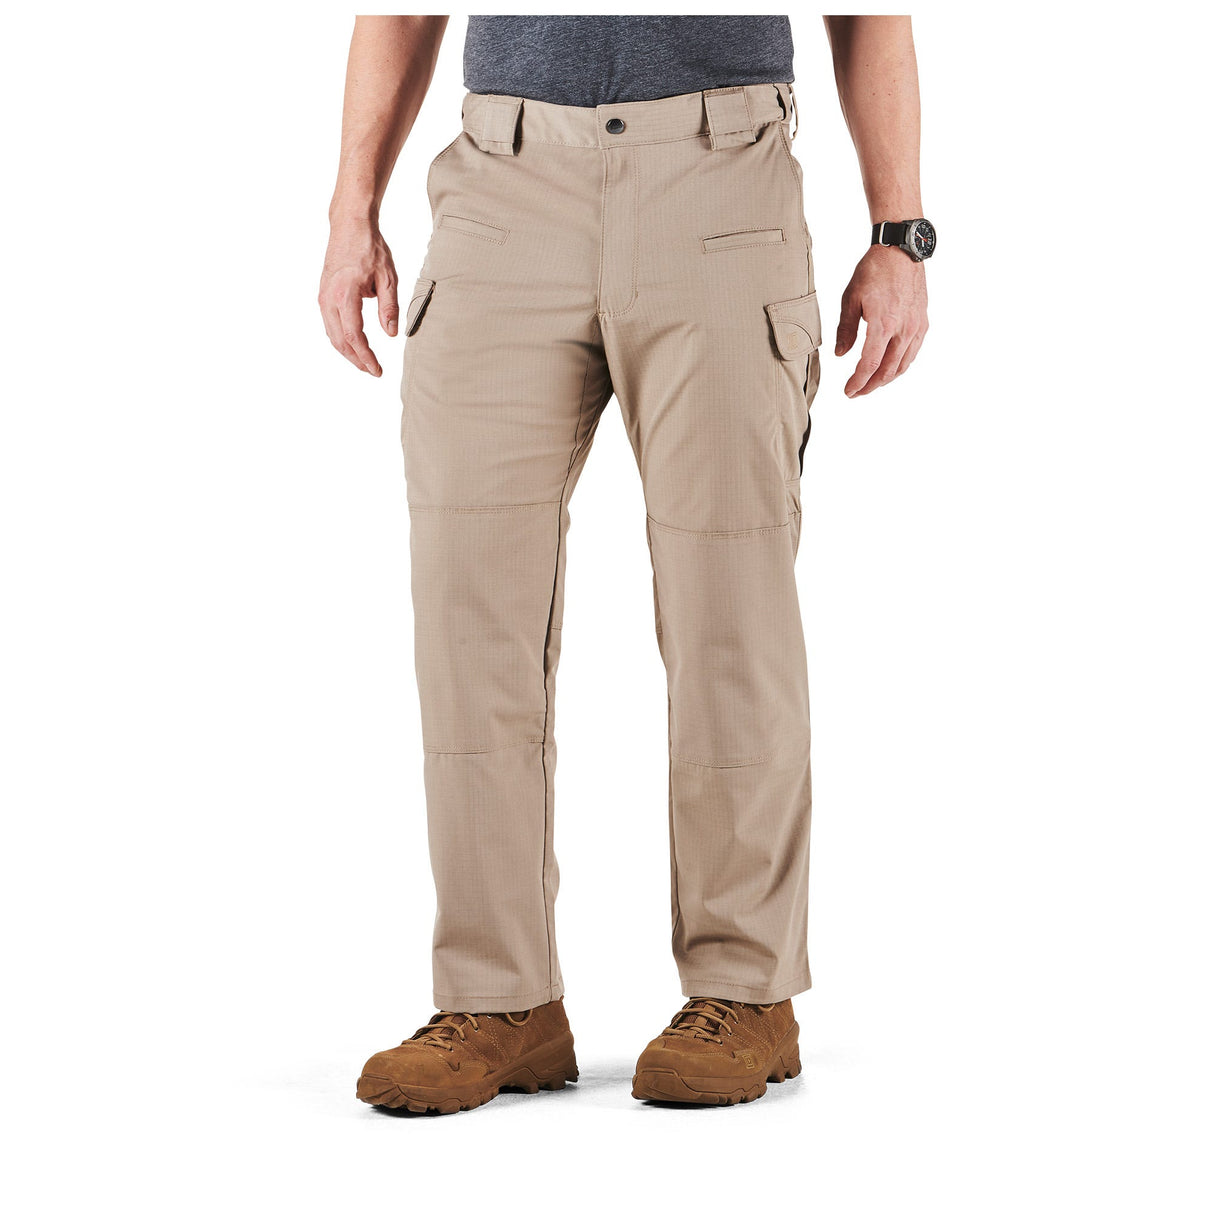 Stryke Pant With Flex Tac - Size 28-36